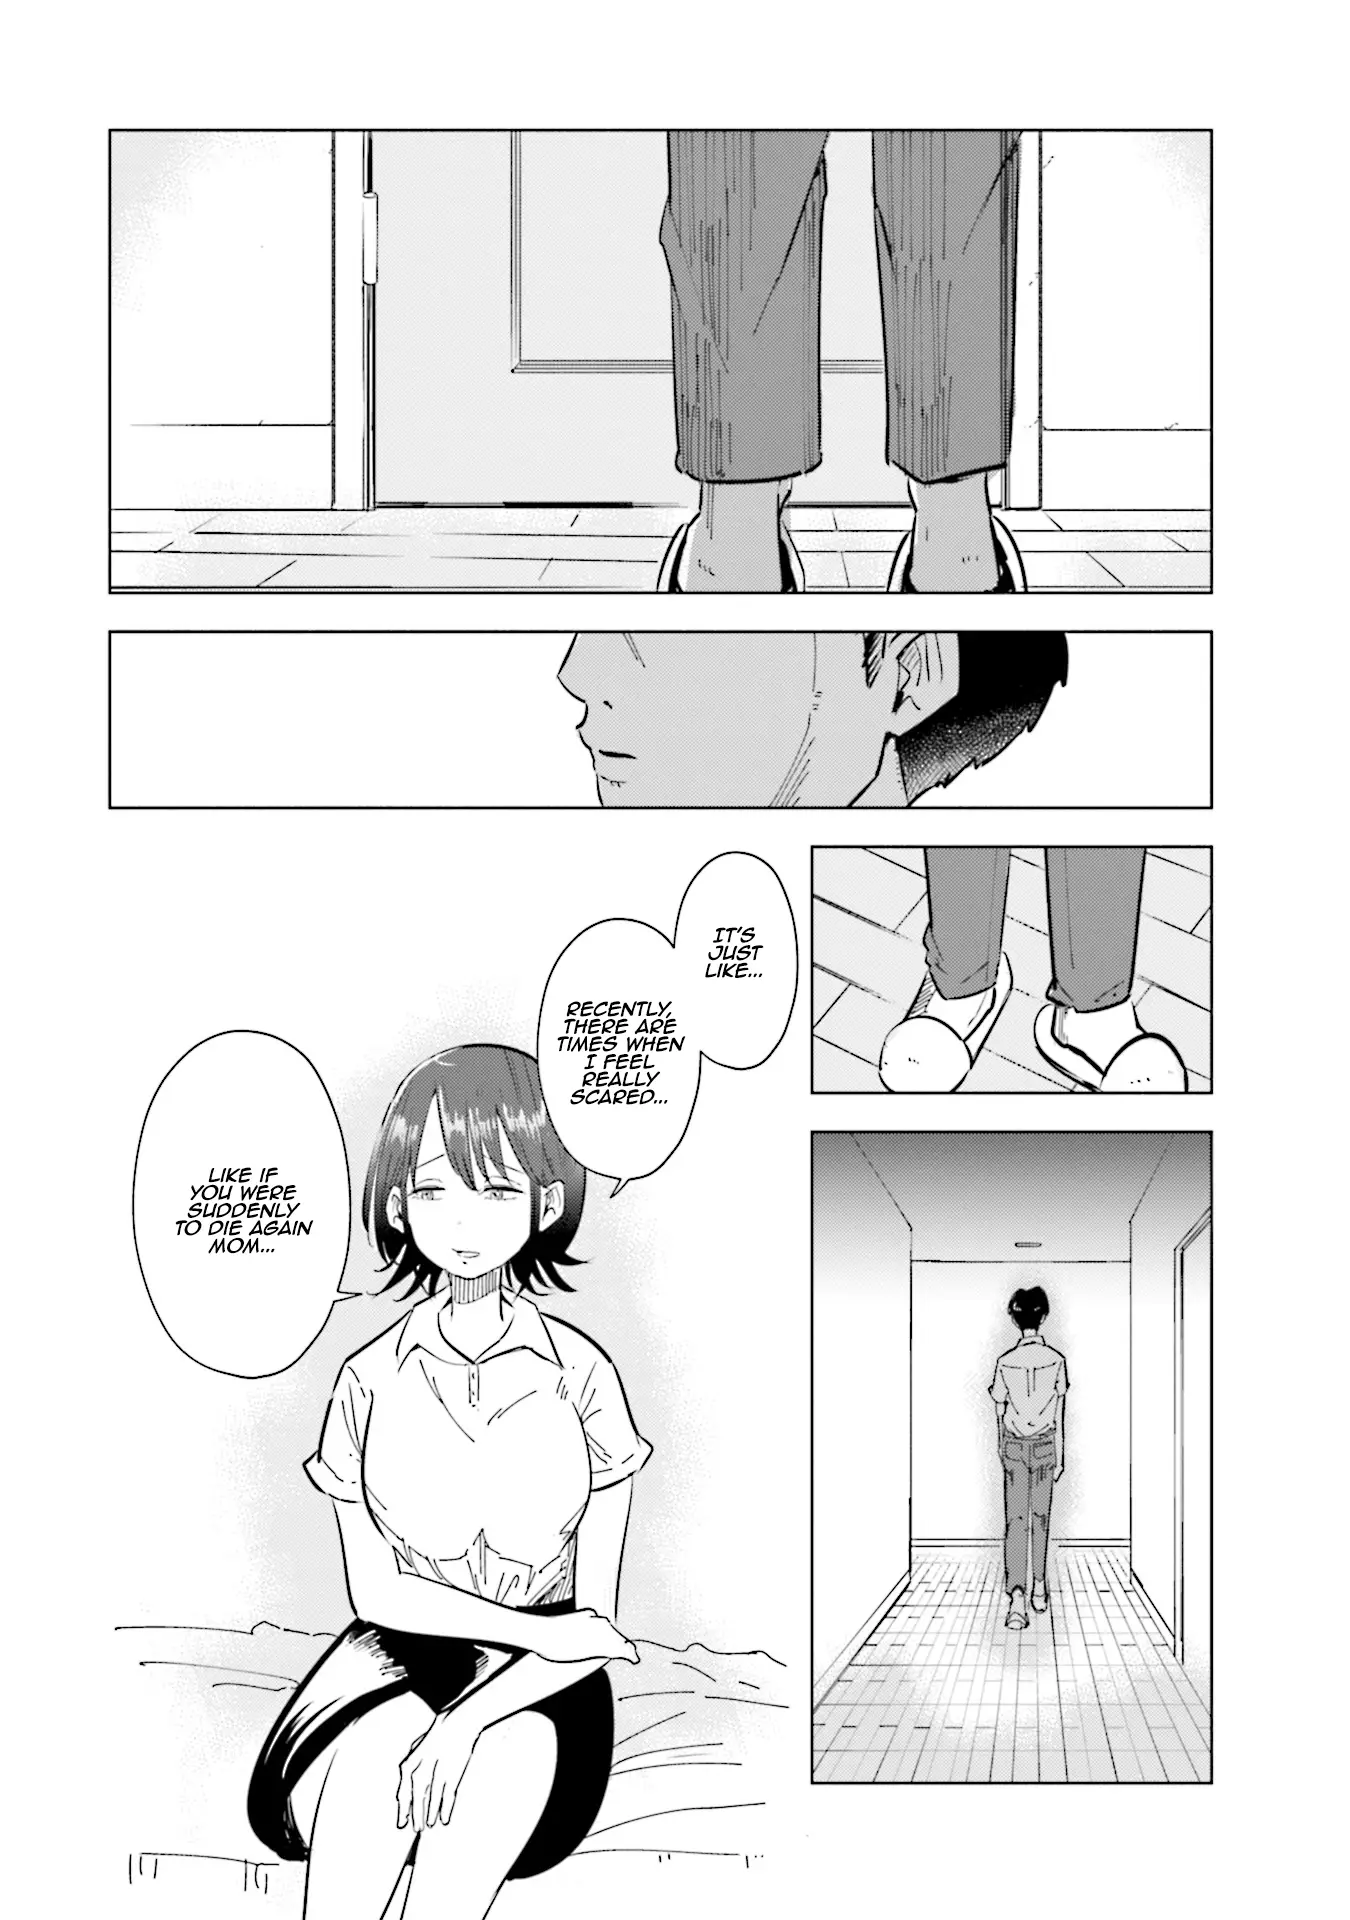 If My Wife Became An Elementary School Student - 19 page 19